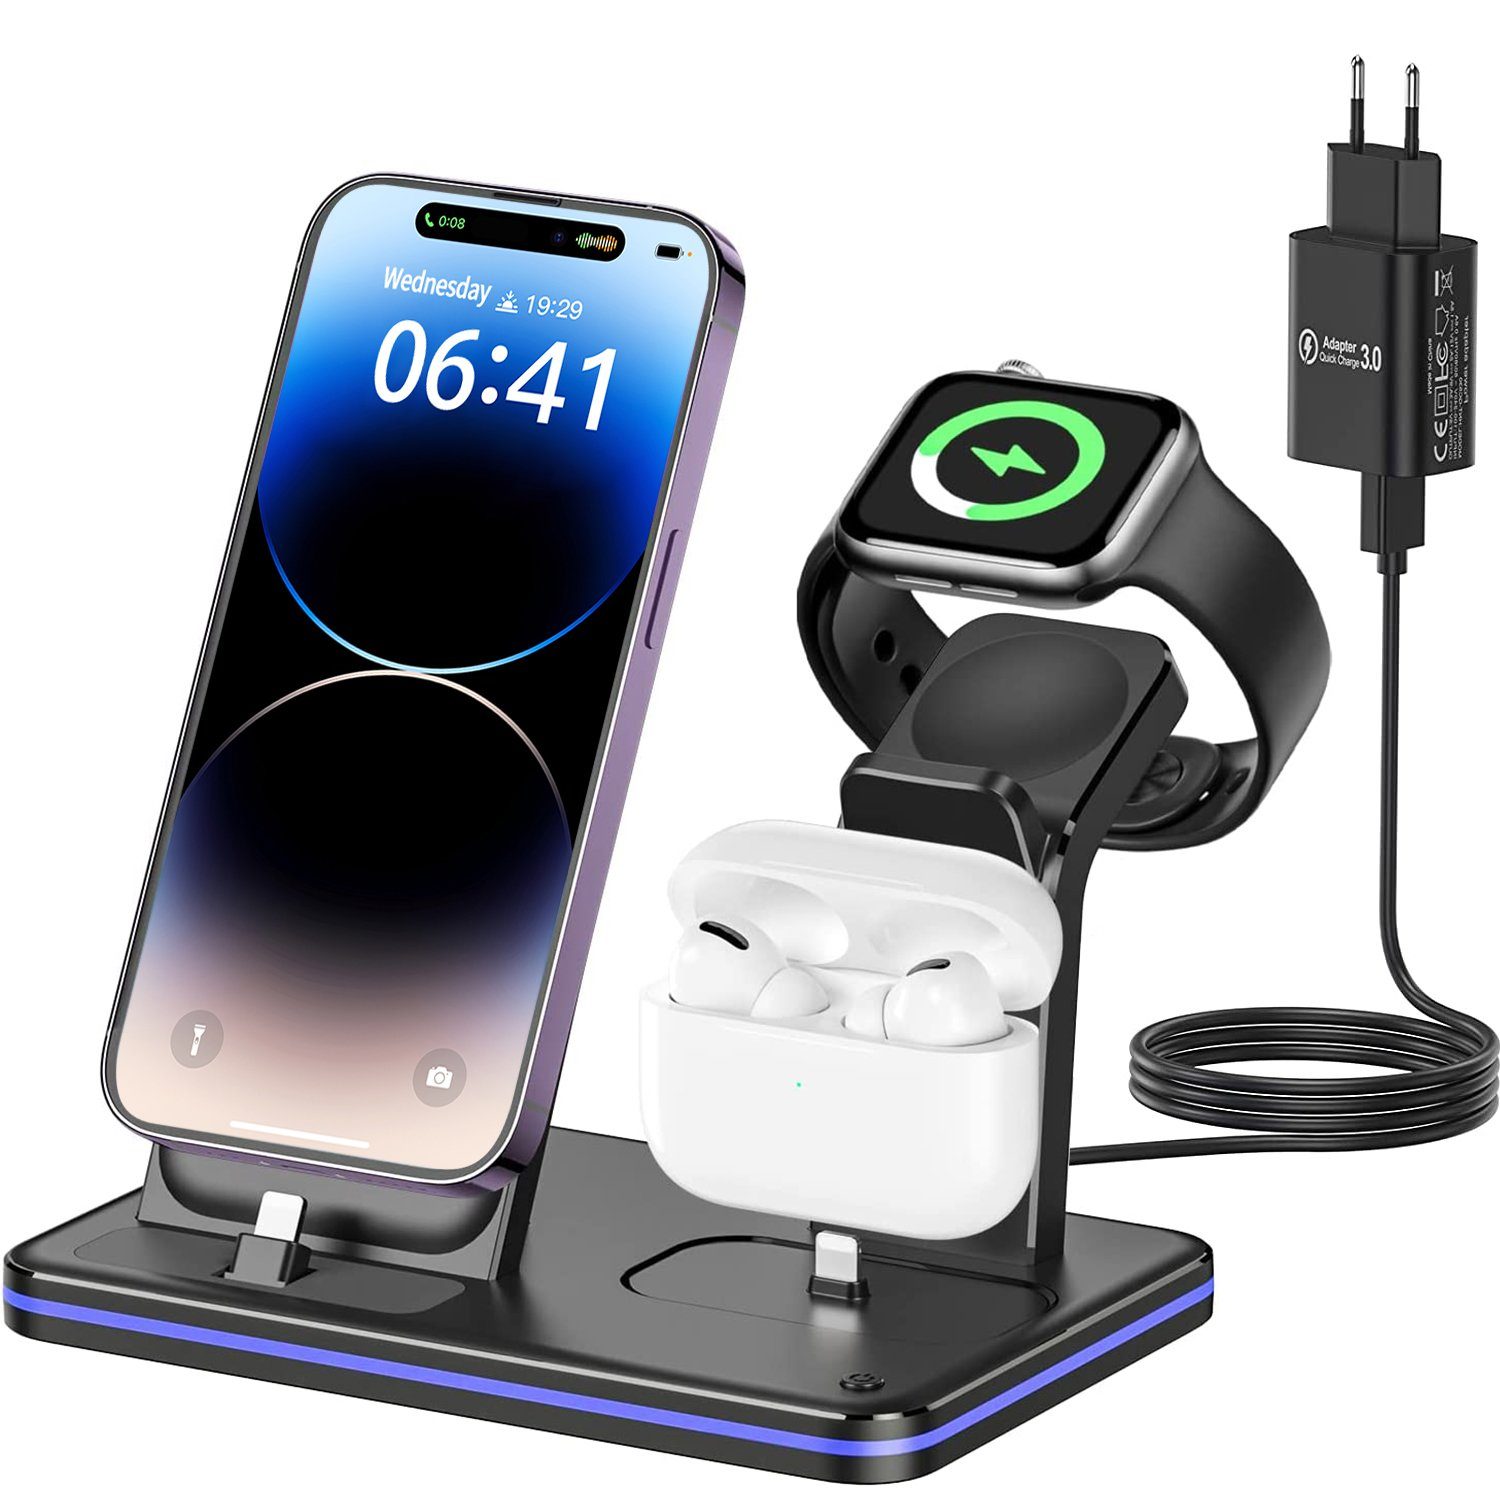 EUARY Handy-Dockingstation Induktive Ladestation Apple 3 in 1 iPhone iWatch  Airpods Induktions, (Kabellose Ladegerät Handy Induktions Ladegeräte),  Wireless Charger für Apple iWatch iPhone Airpods Charging Station